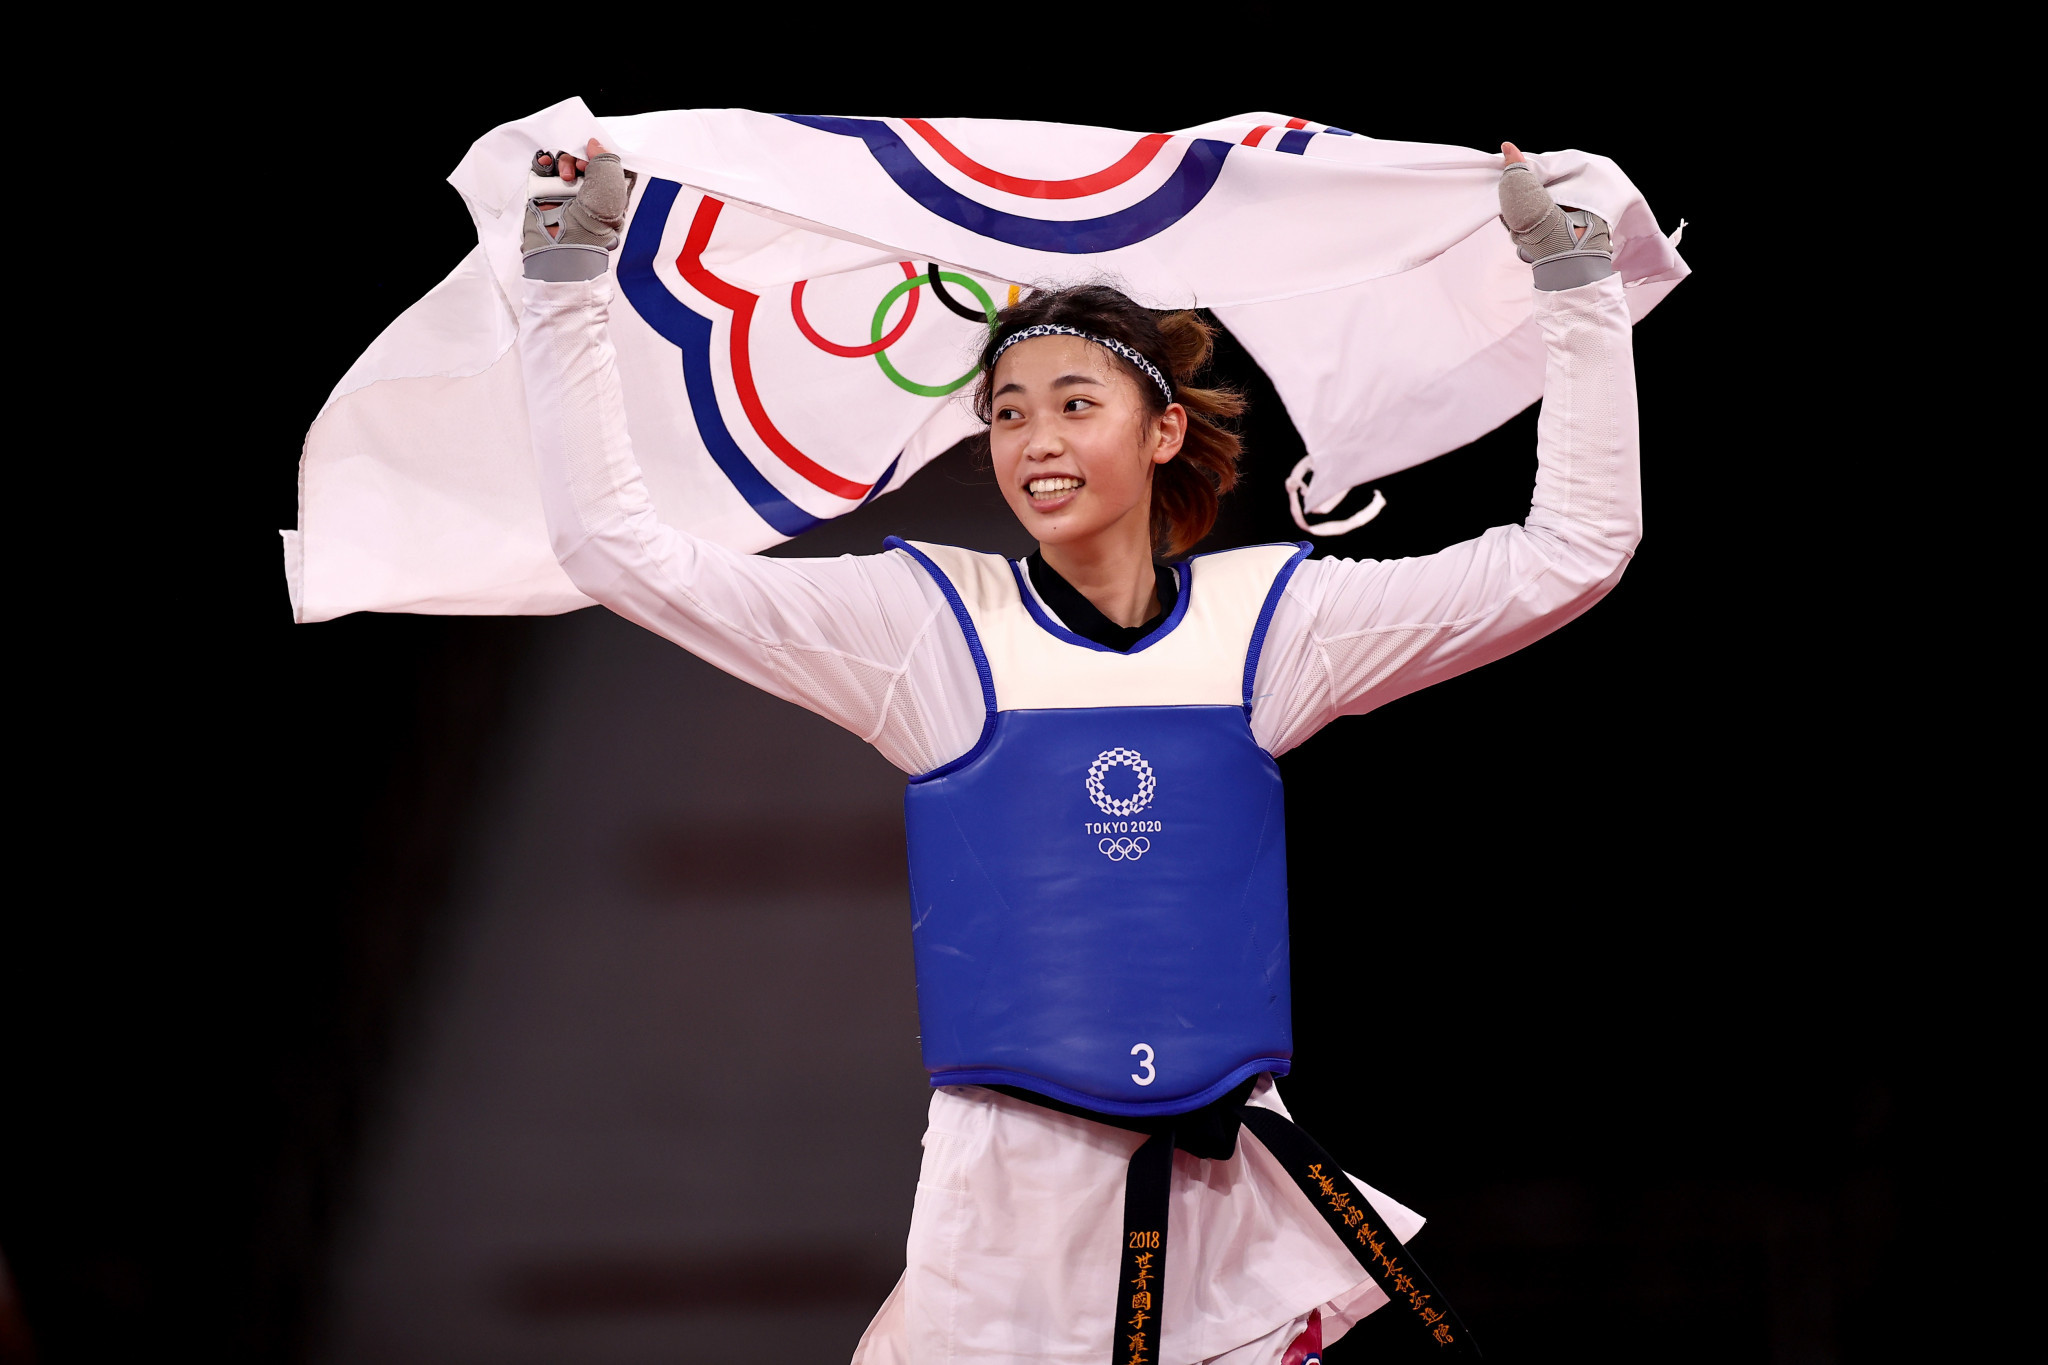 Chinese Taipei's Lo Chia-ling will be hoping to add another medal to her cabinet at the Summer World University Games after winning taekwondo bronze at last year's Olympics in Tokyo ©Getty Images